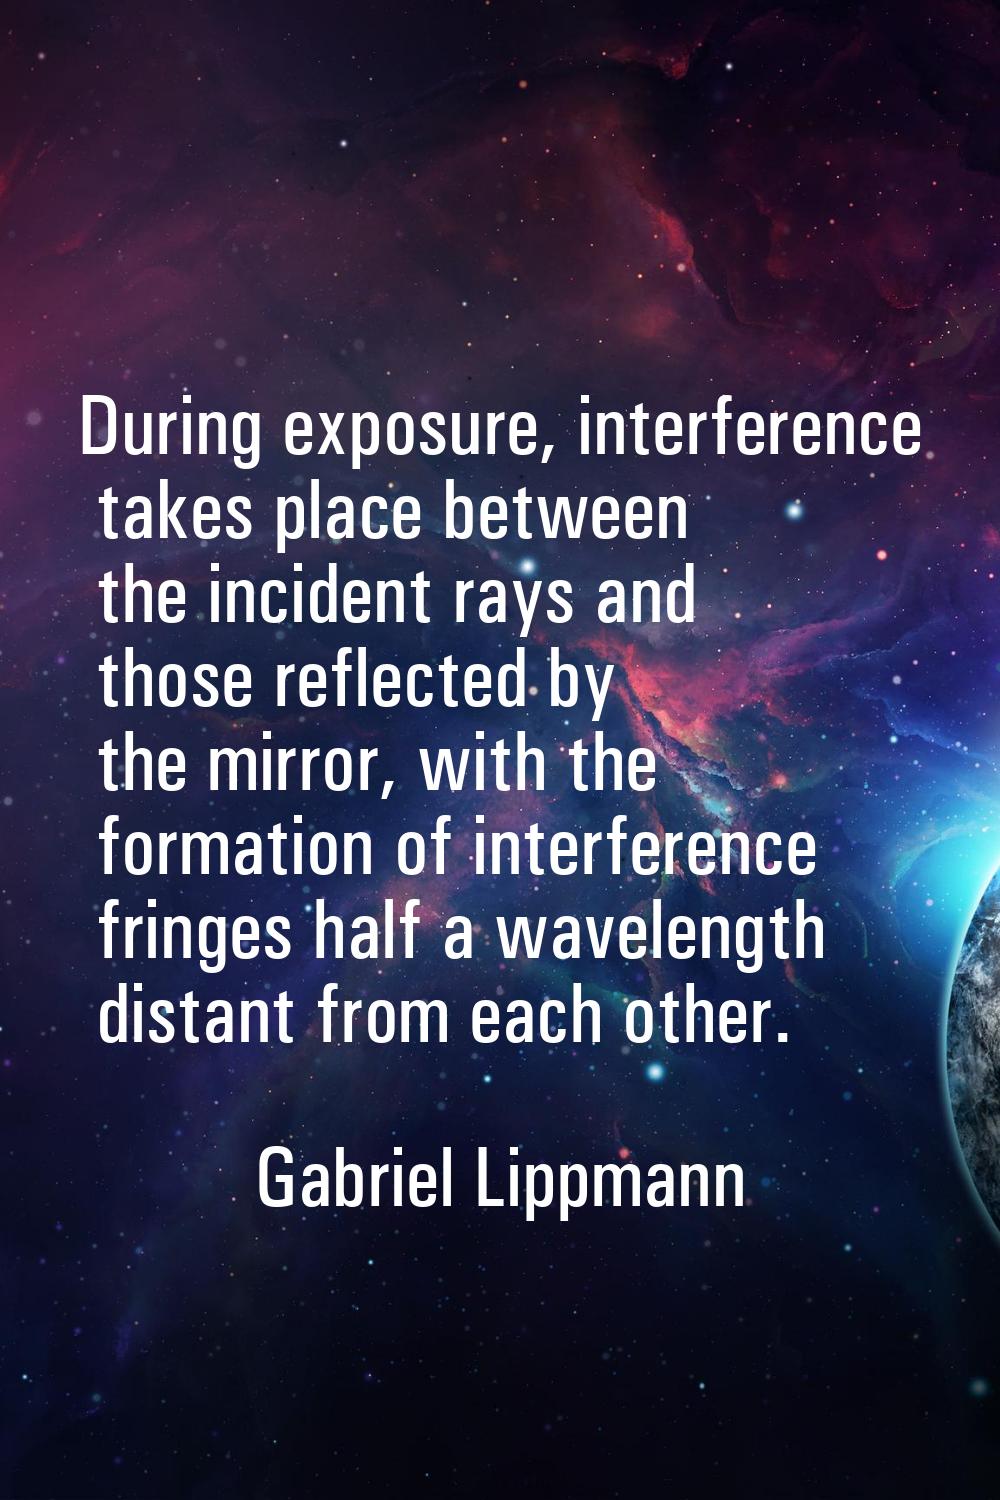 During exposure, interference takes place between the incident rays and those reflected by the mirr